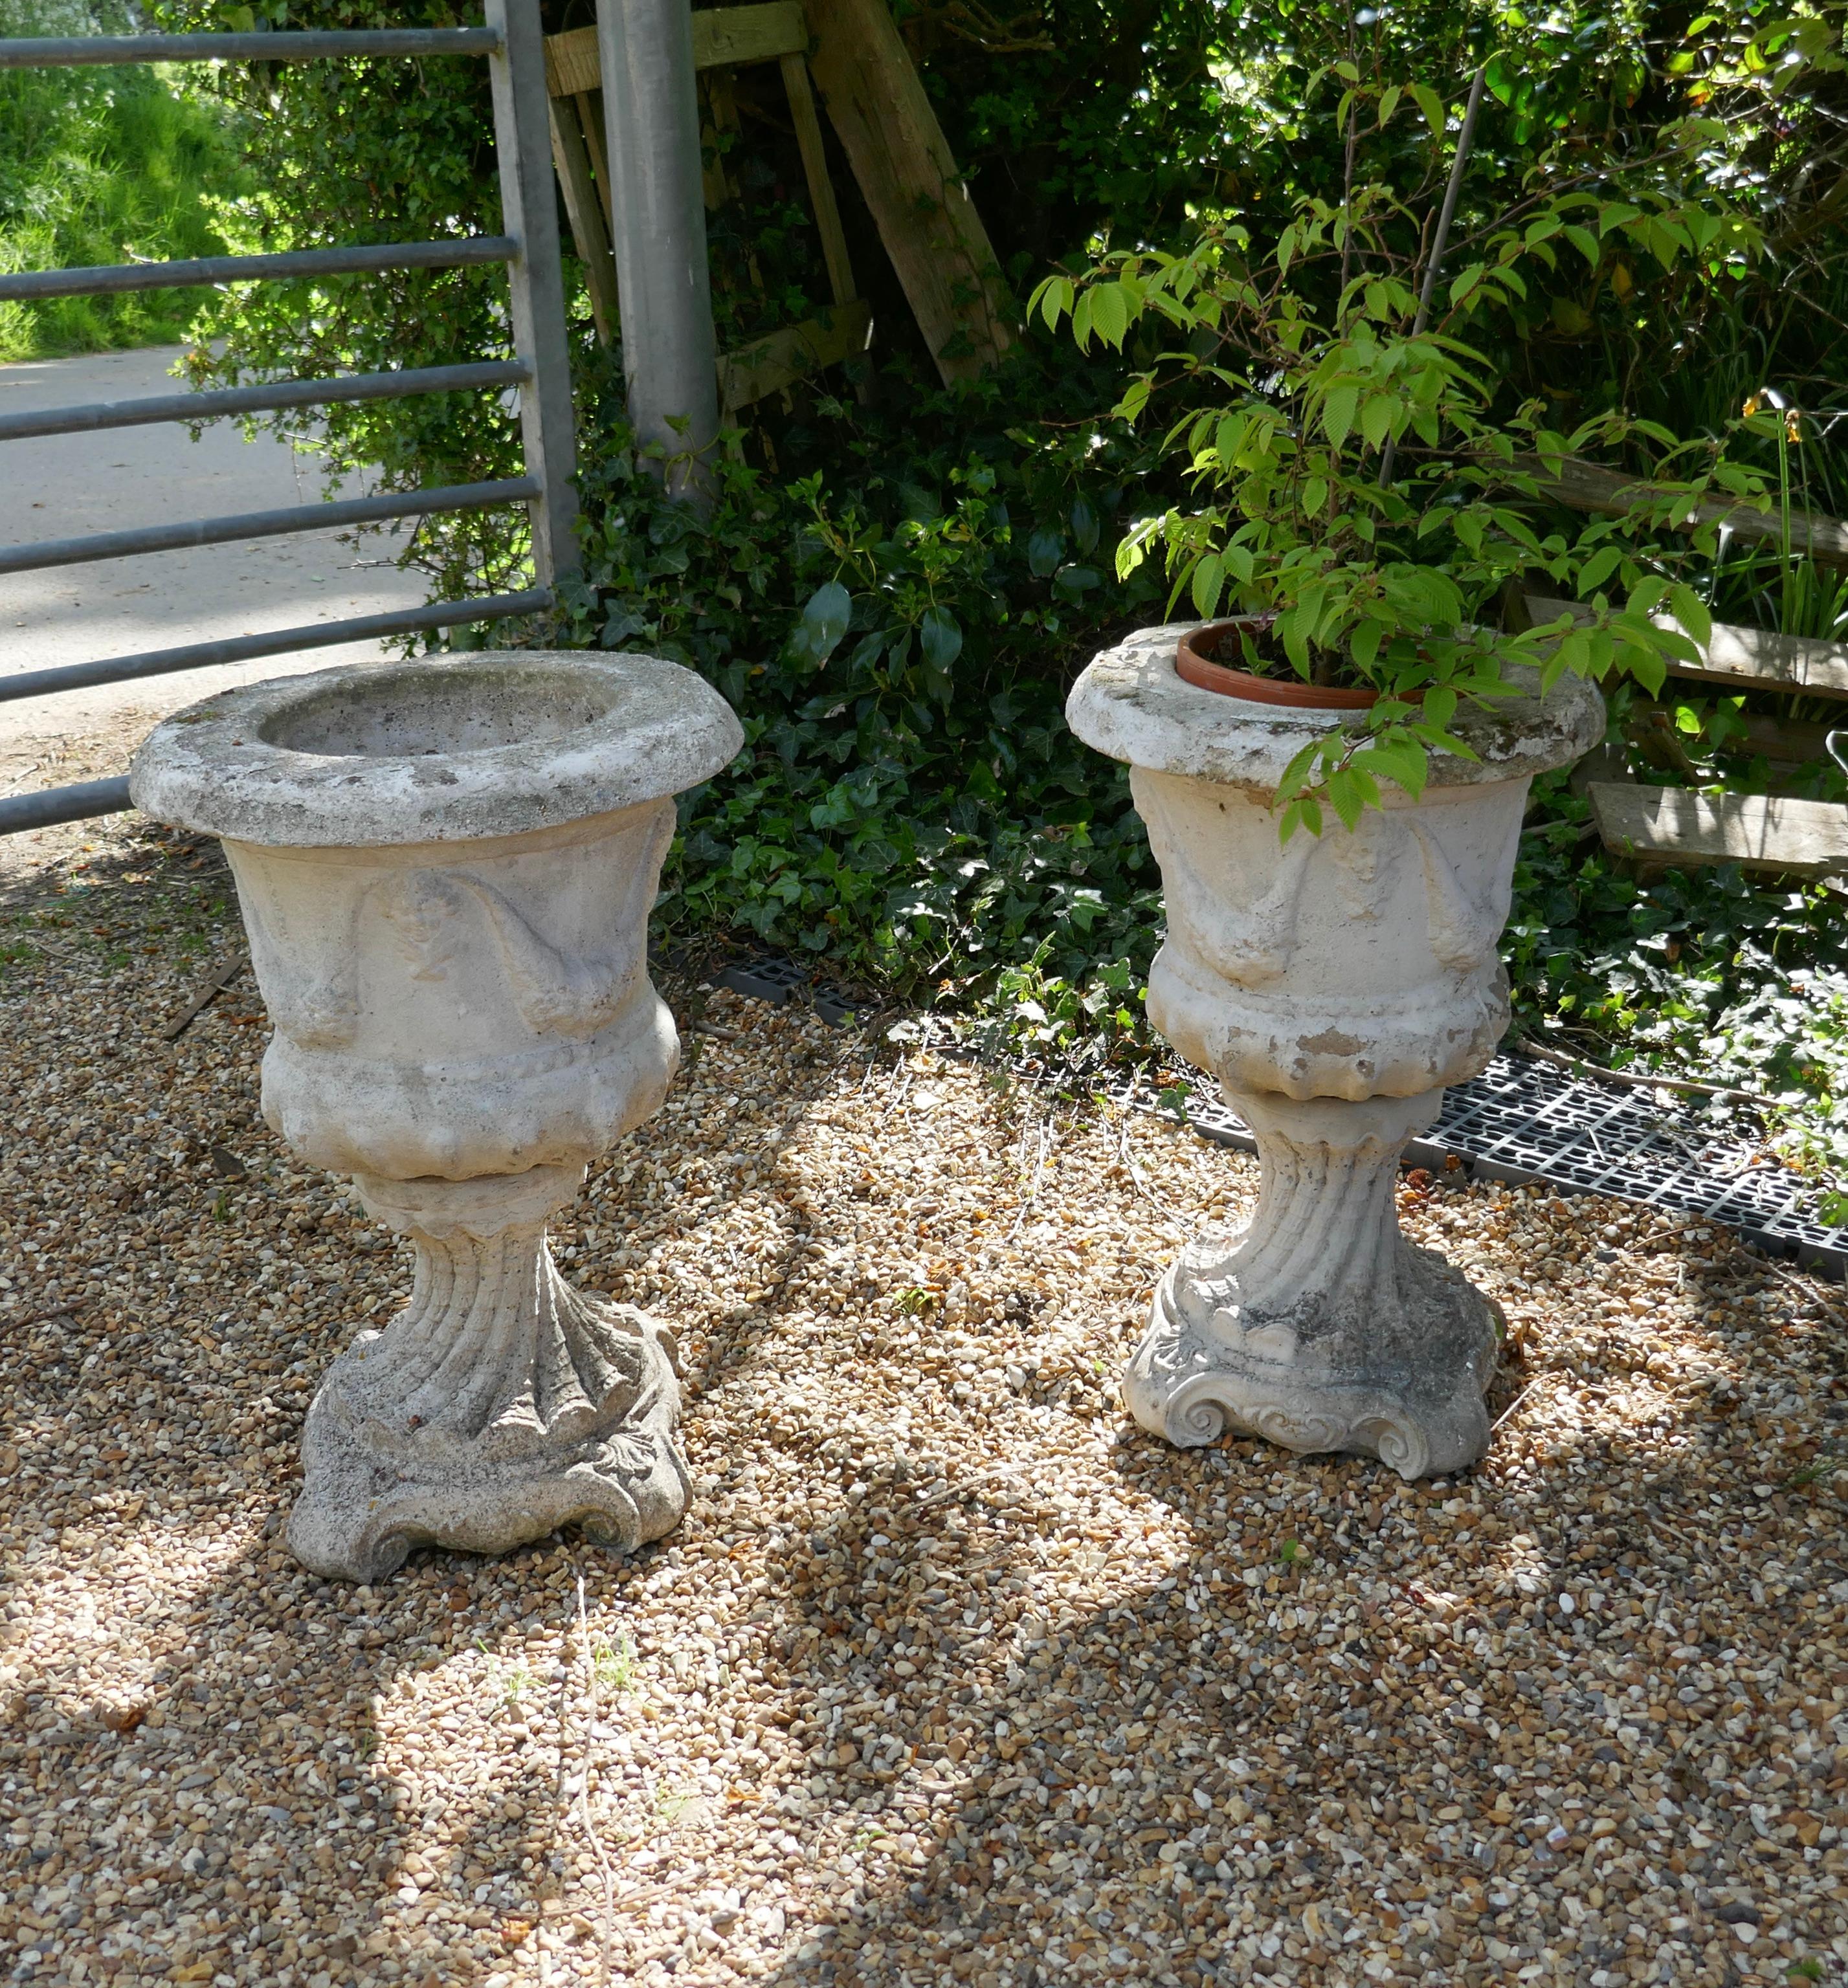 Pair of 20th century green man cast garden planters

A good pair of mid 20th century planters, they are decorated in the Gothic style with swags and faces. They are well weathered and have a drainage hole in the centre, the pots and the bases come